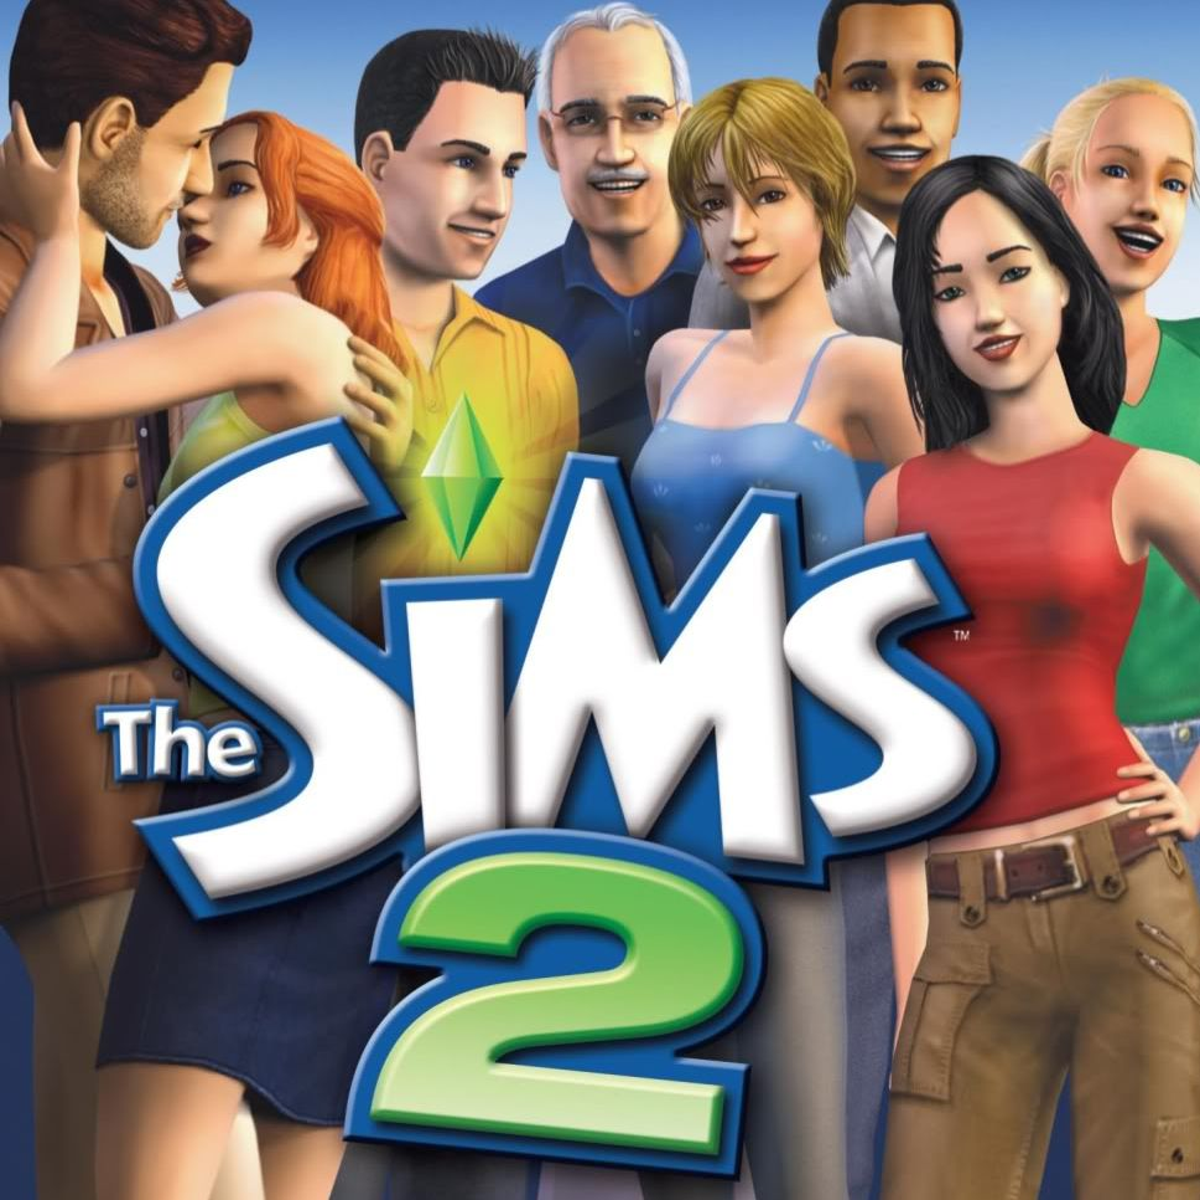 EA to Discontinue Tech Support For The Sims 2 - IGN